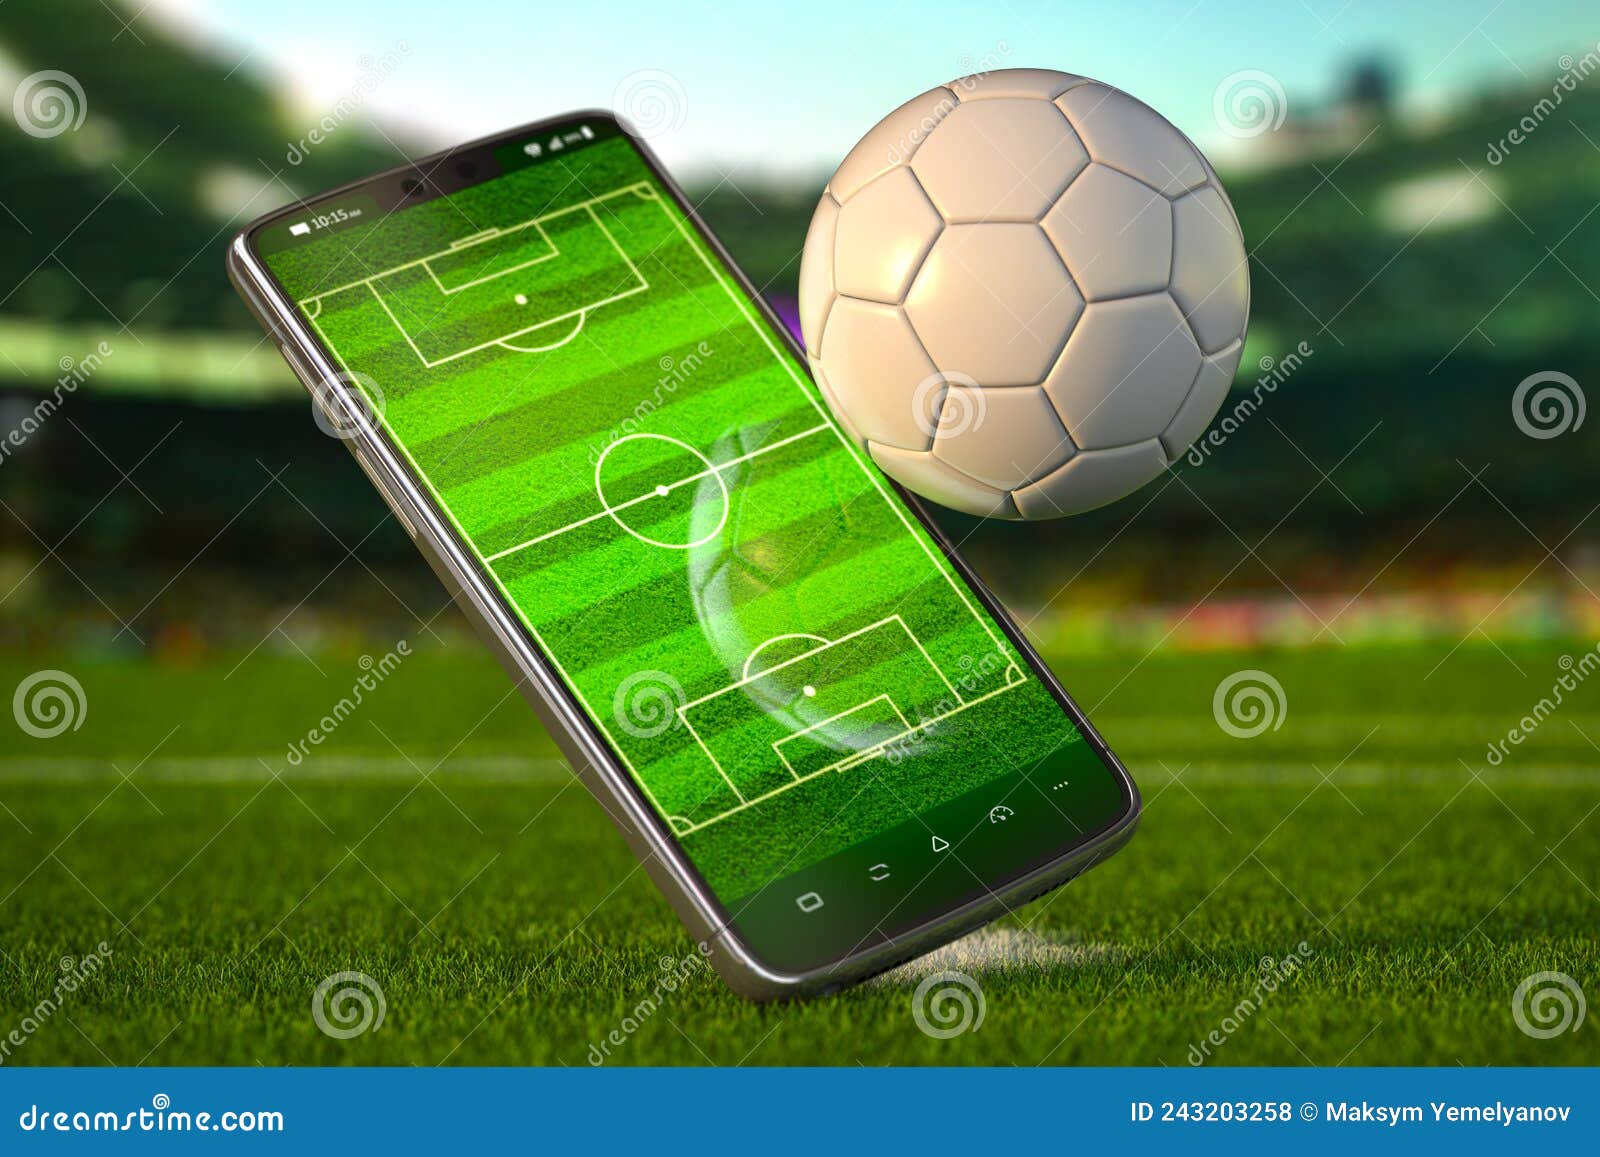 Mobile Phone and Soccer Ball